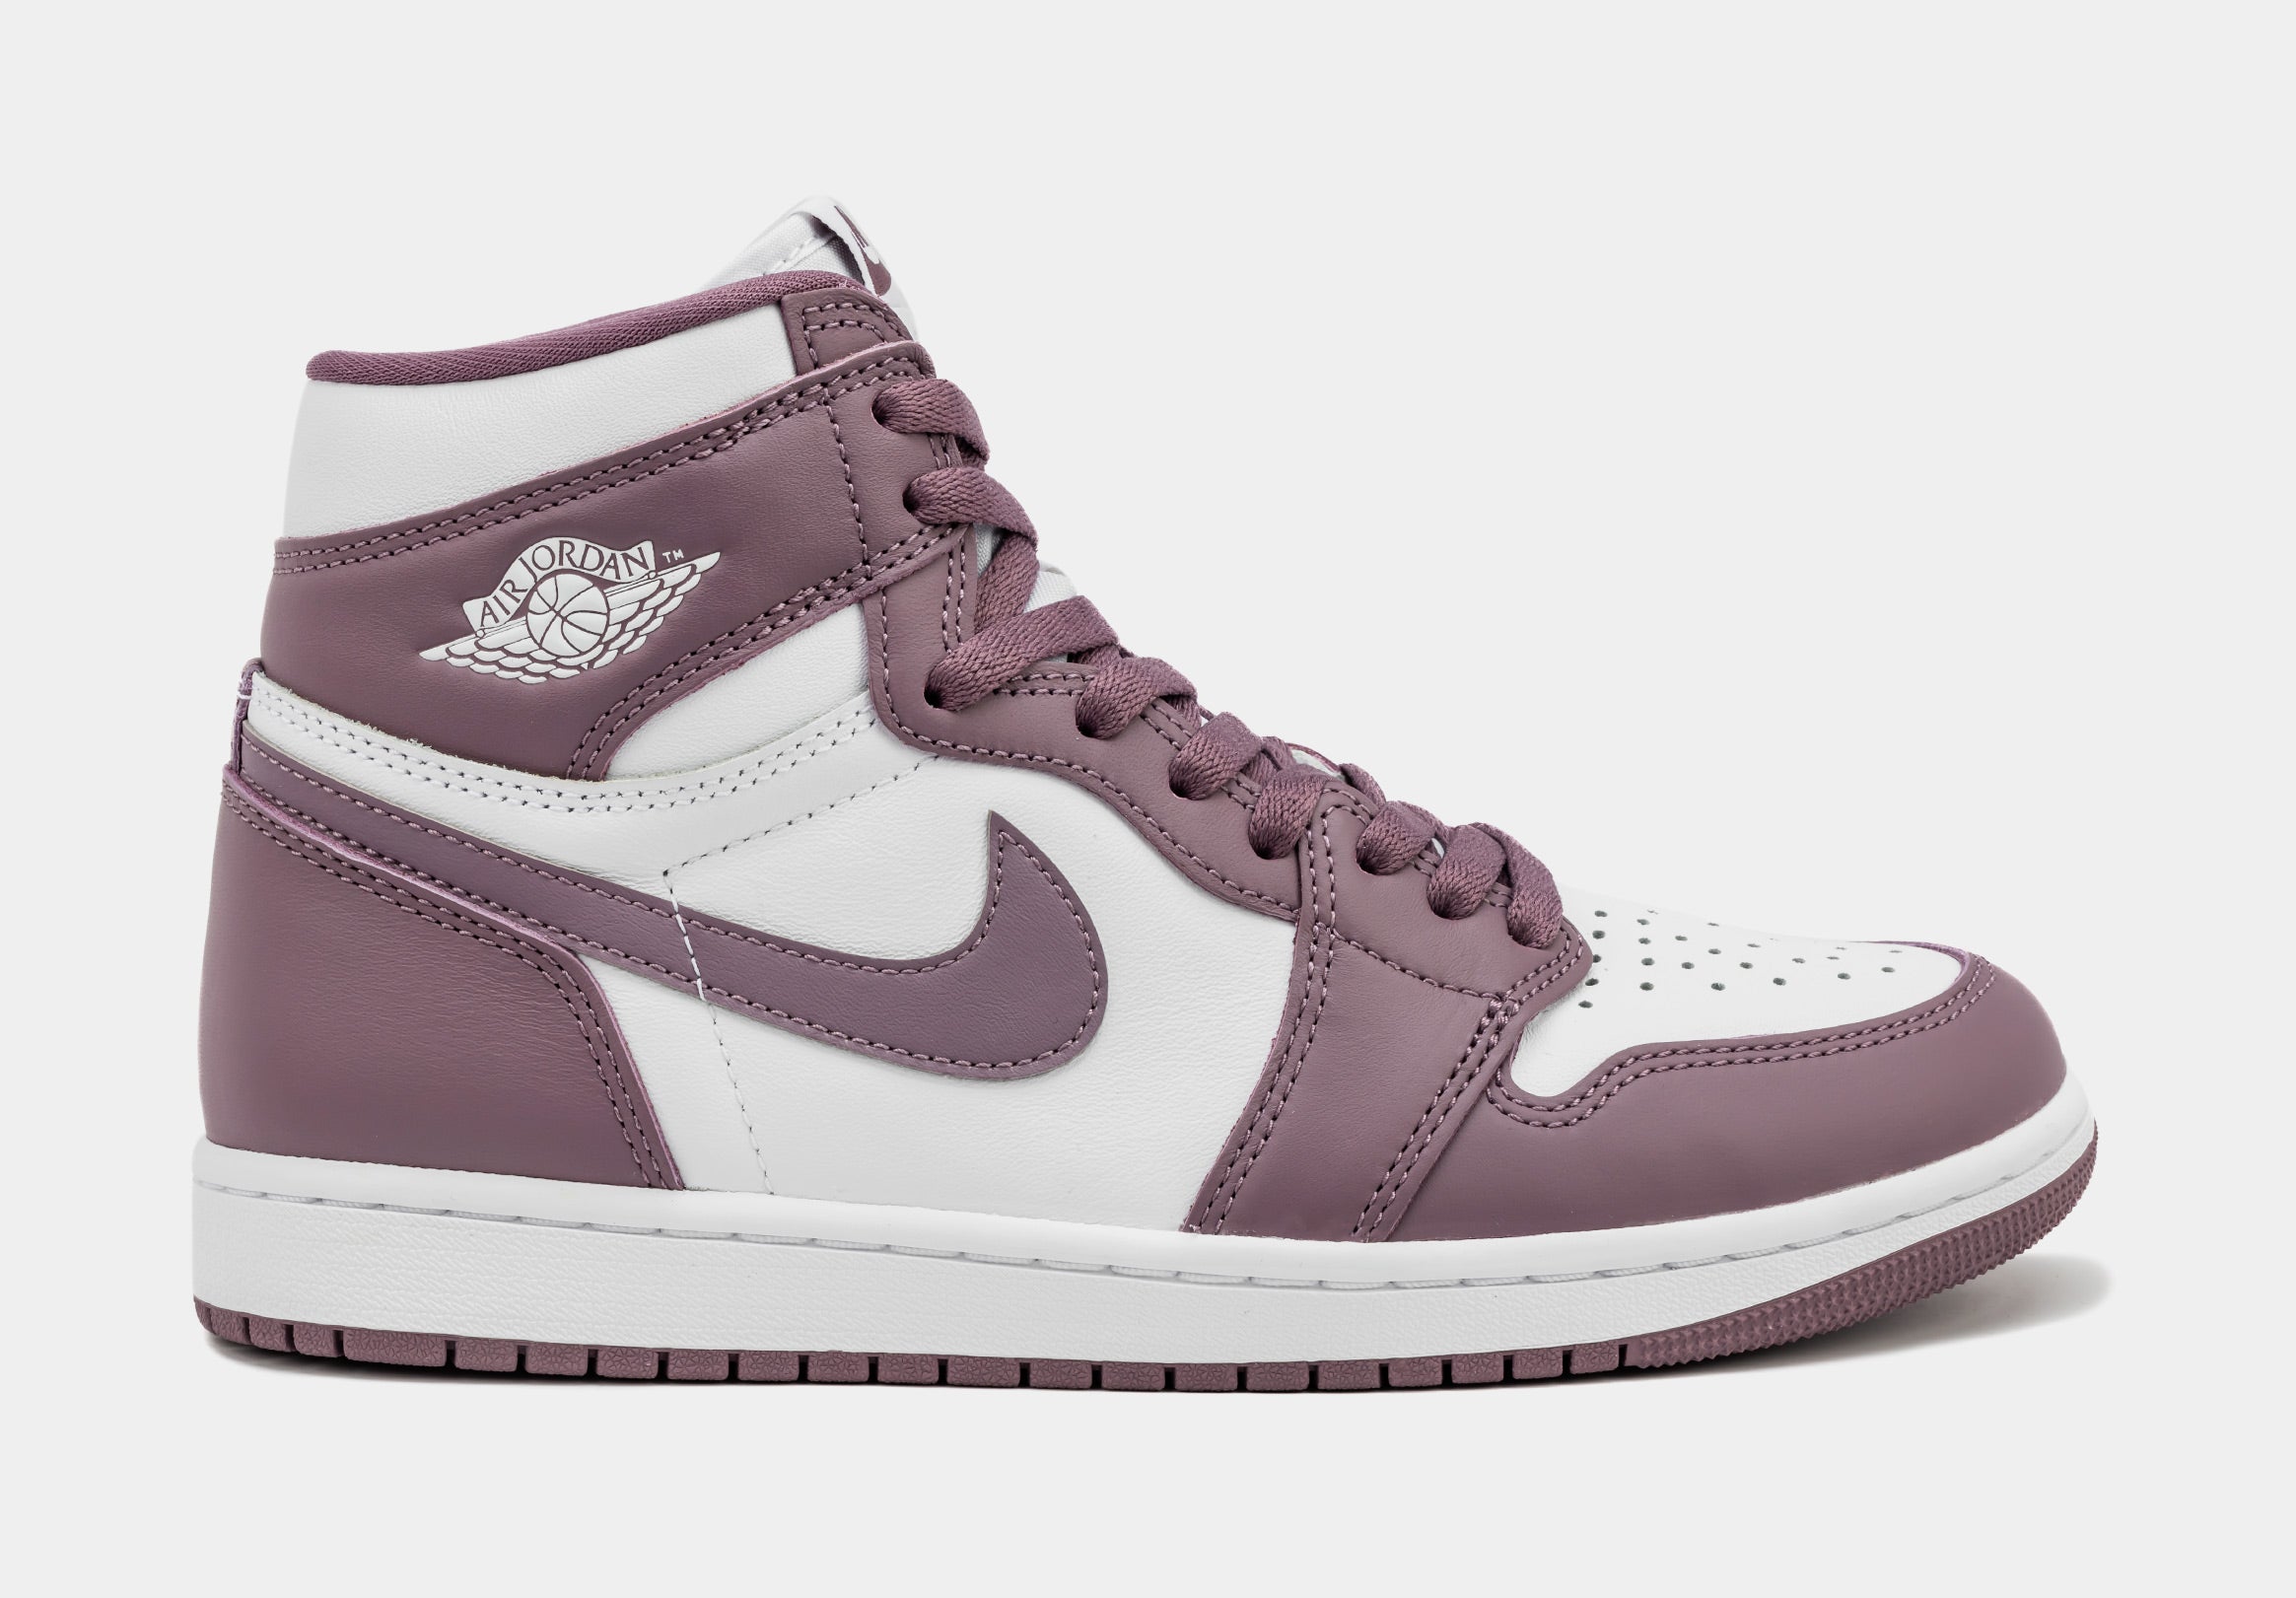 Limited Edition Air Jordan 1 For ONLY $5000 - Today In Sneaks